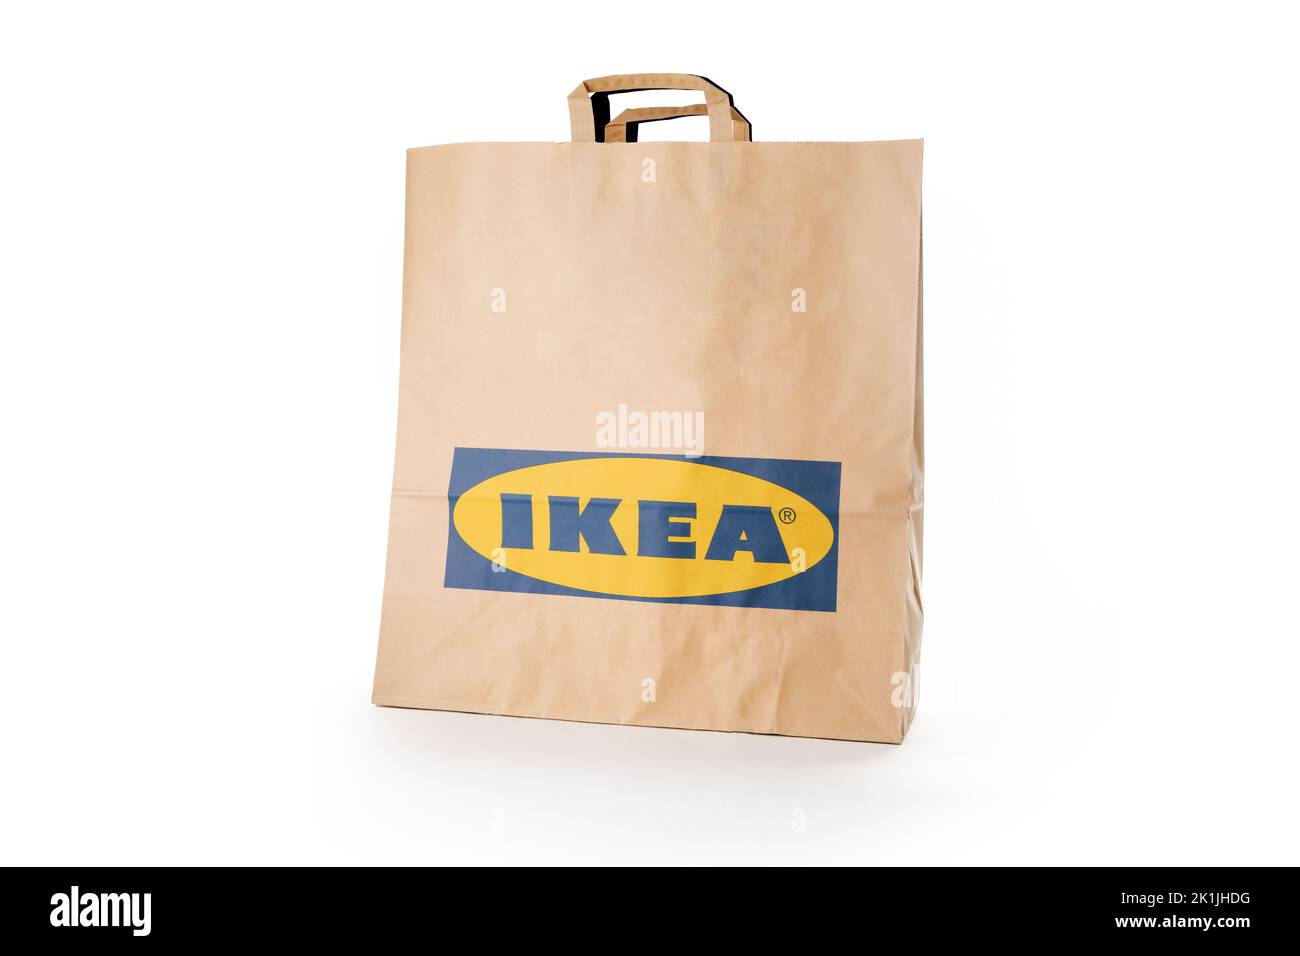 Cyprus, Paphos - SEPTEMBER 08, 2022: Ikea paper bag from famous furniture and home accessories brand. Over white background. Stock Photo